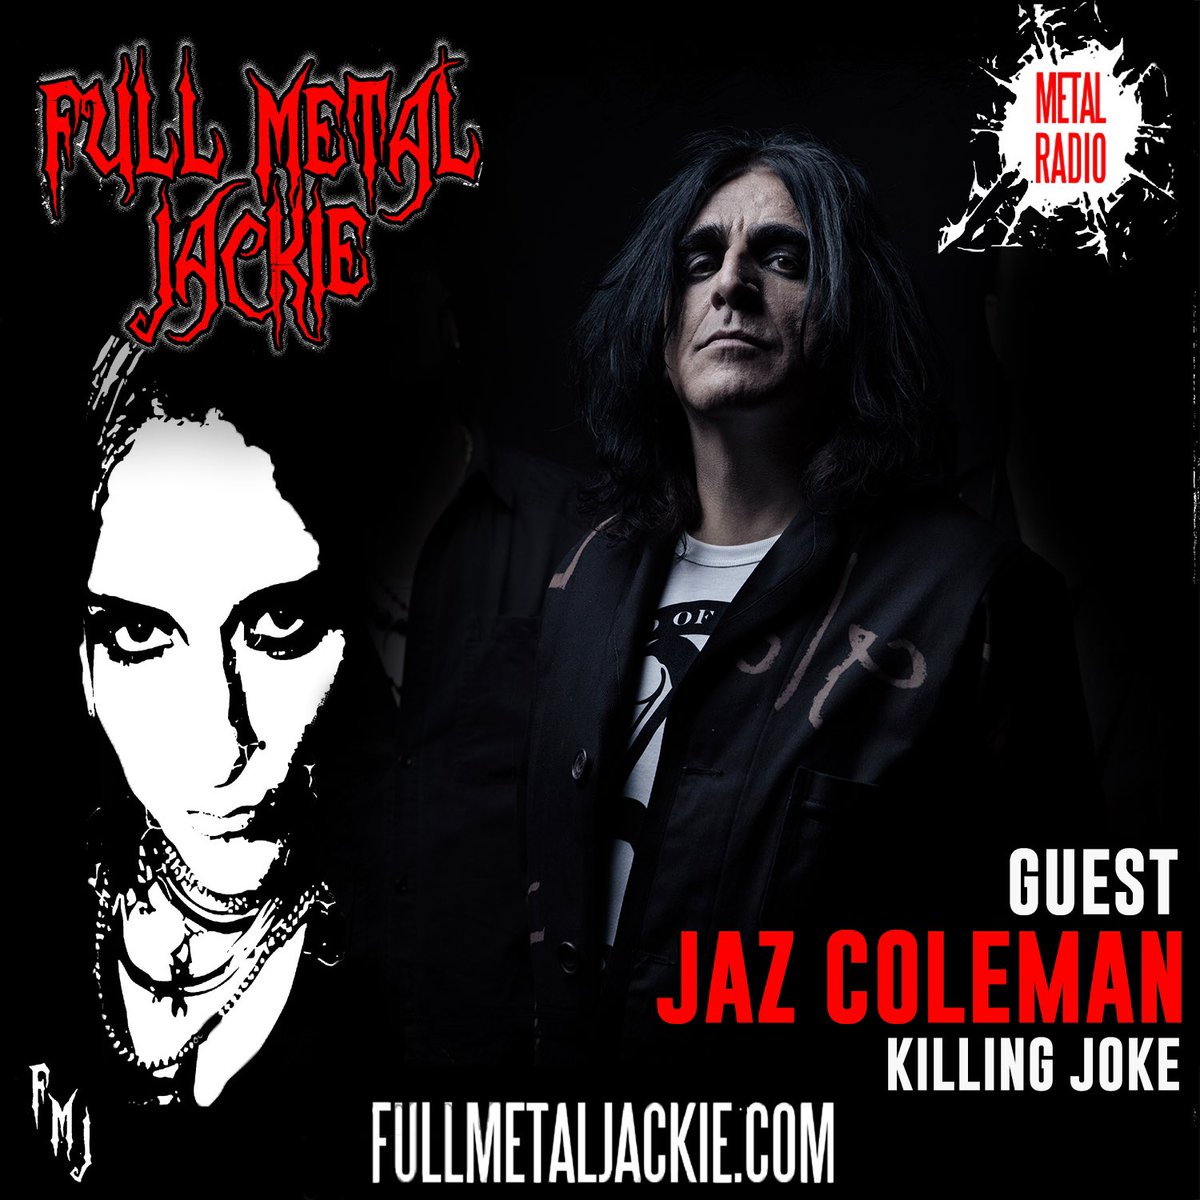 #JazColeman guests on the @FullMetalJackie radio show this weekend! Find a station airing/streaming the show: bit.ly/3wbJySg